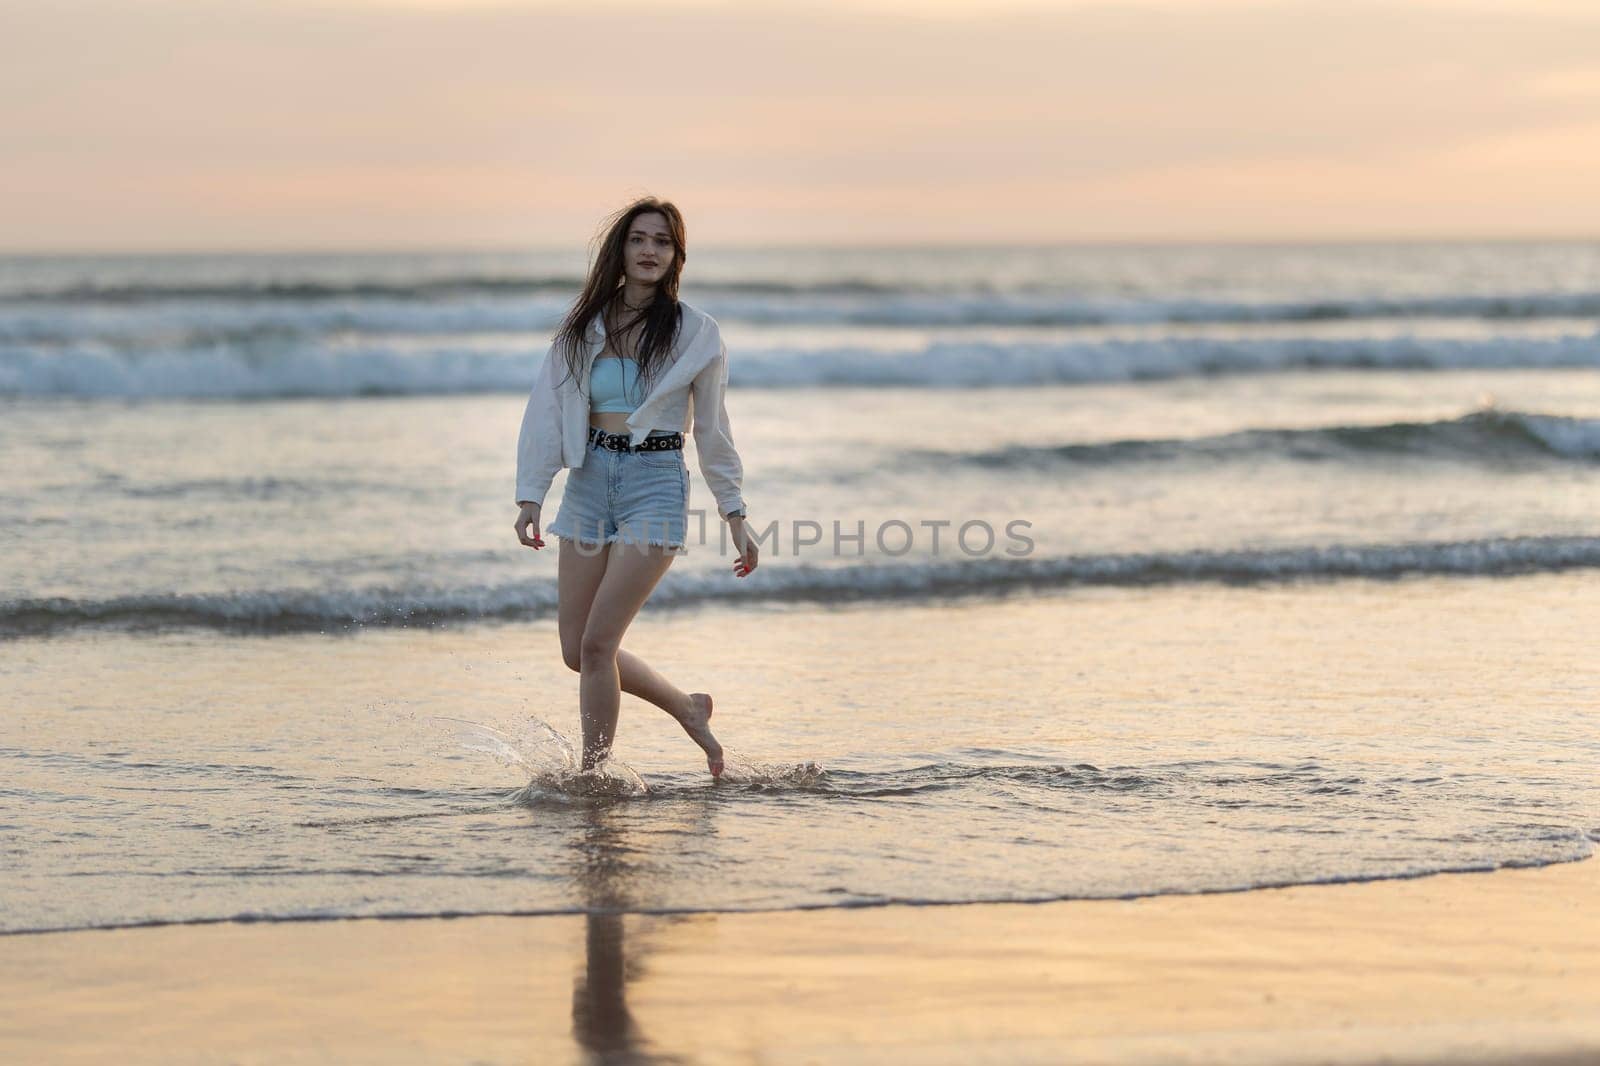 A woman is walking on the beach in the water. She is wearing a white shirt and blue shorts. The water is calm and the sky is orange